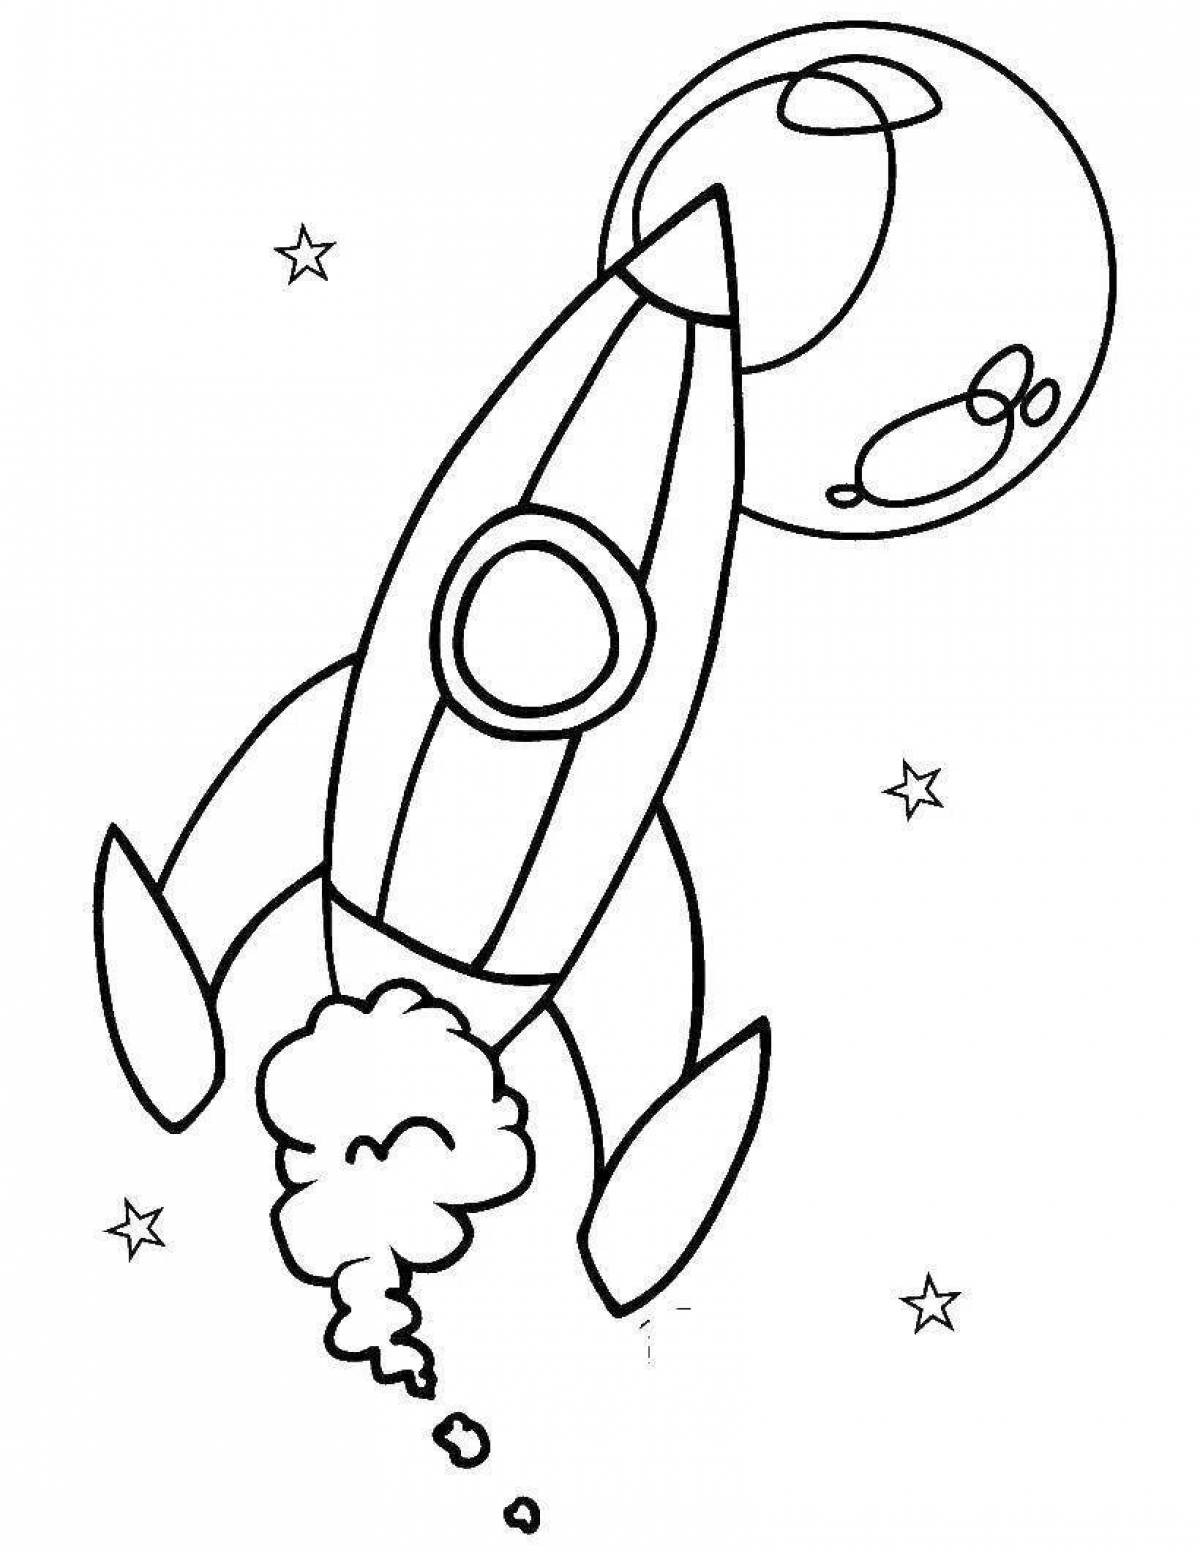 Great space coloring book for kids